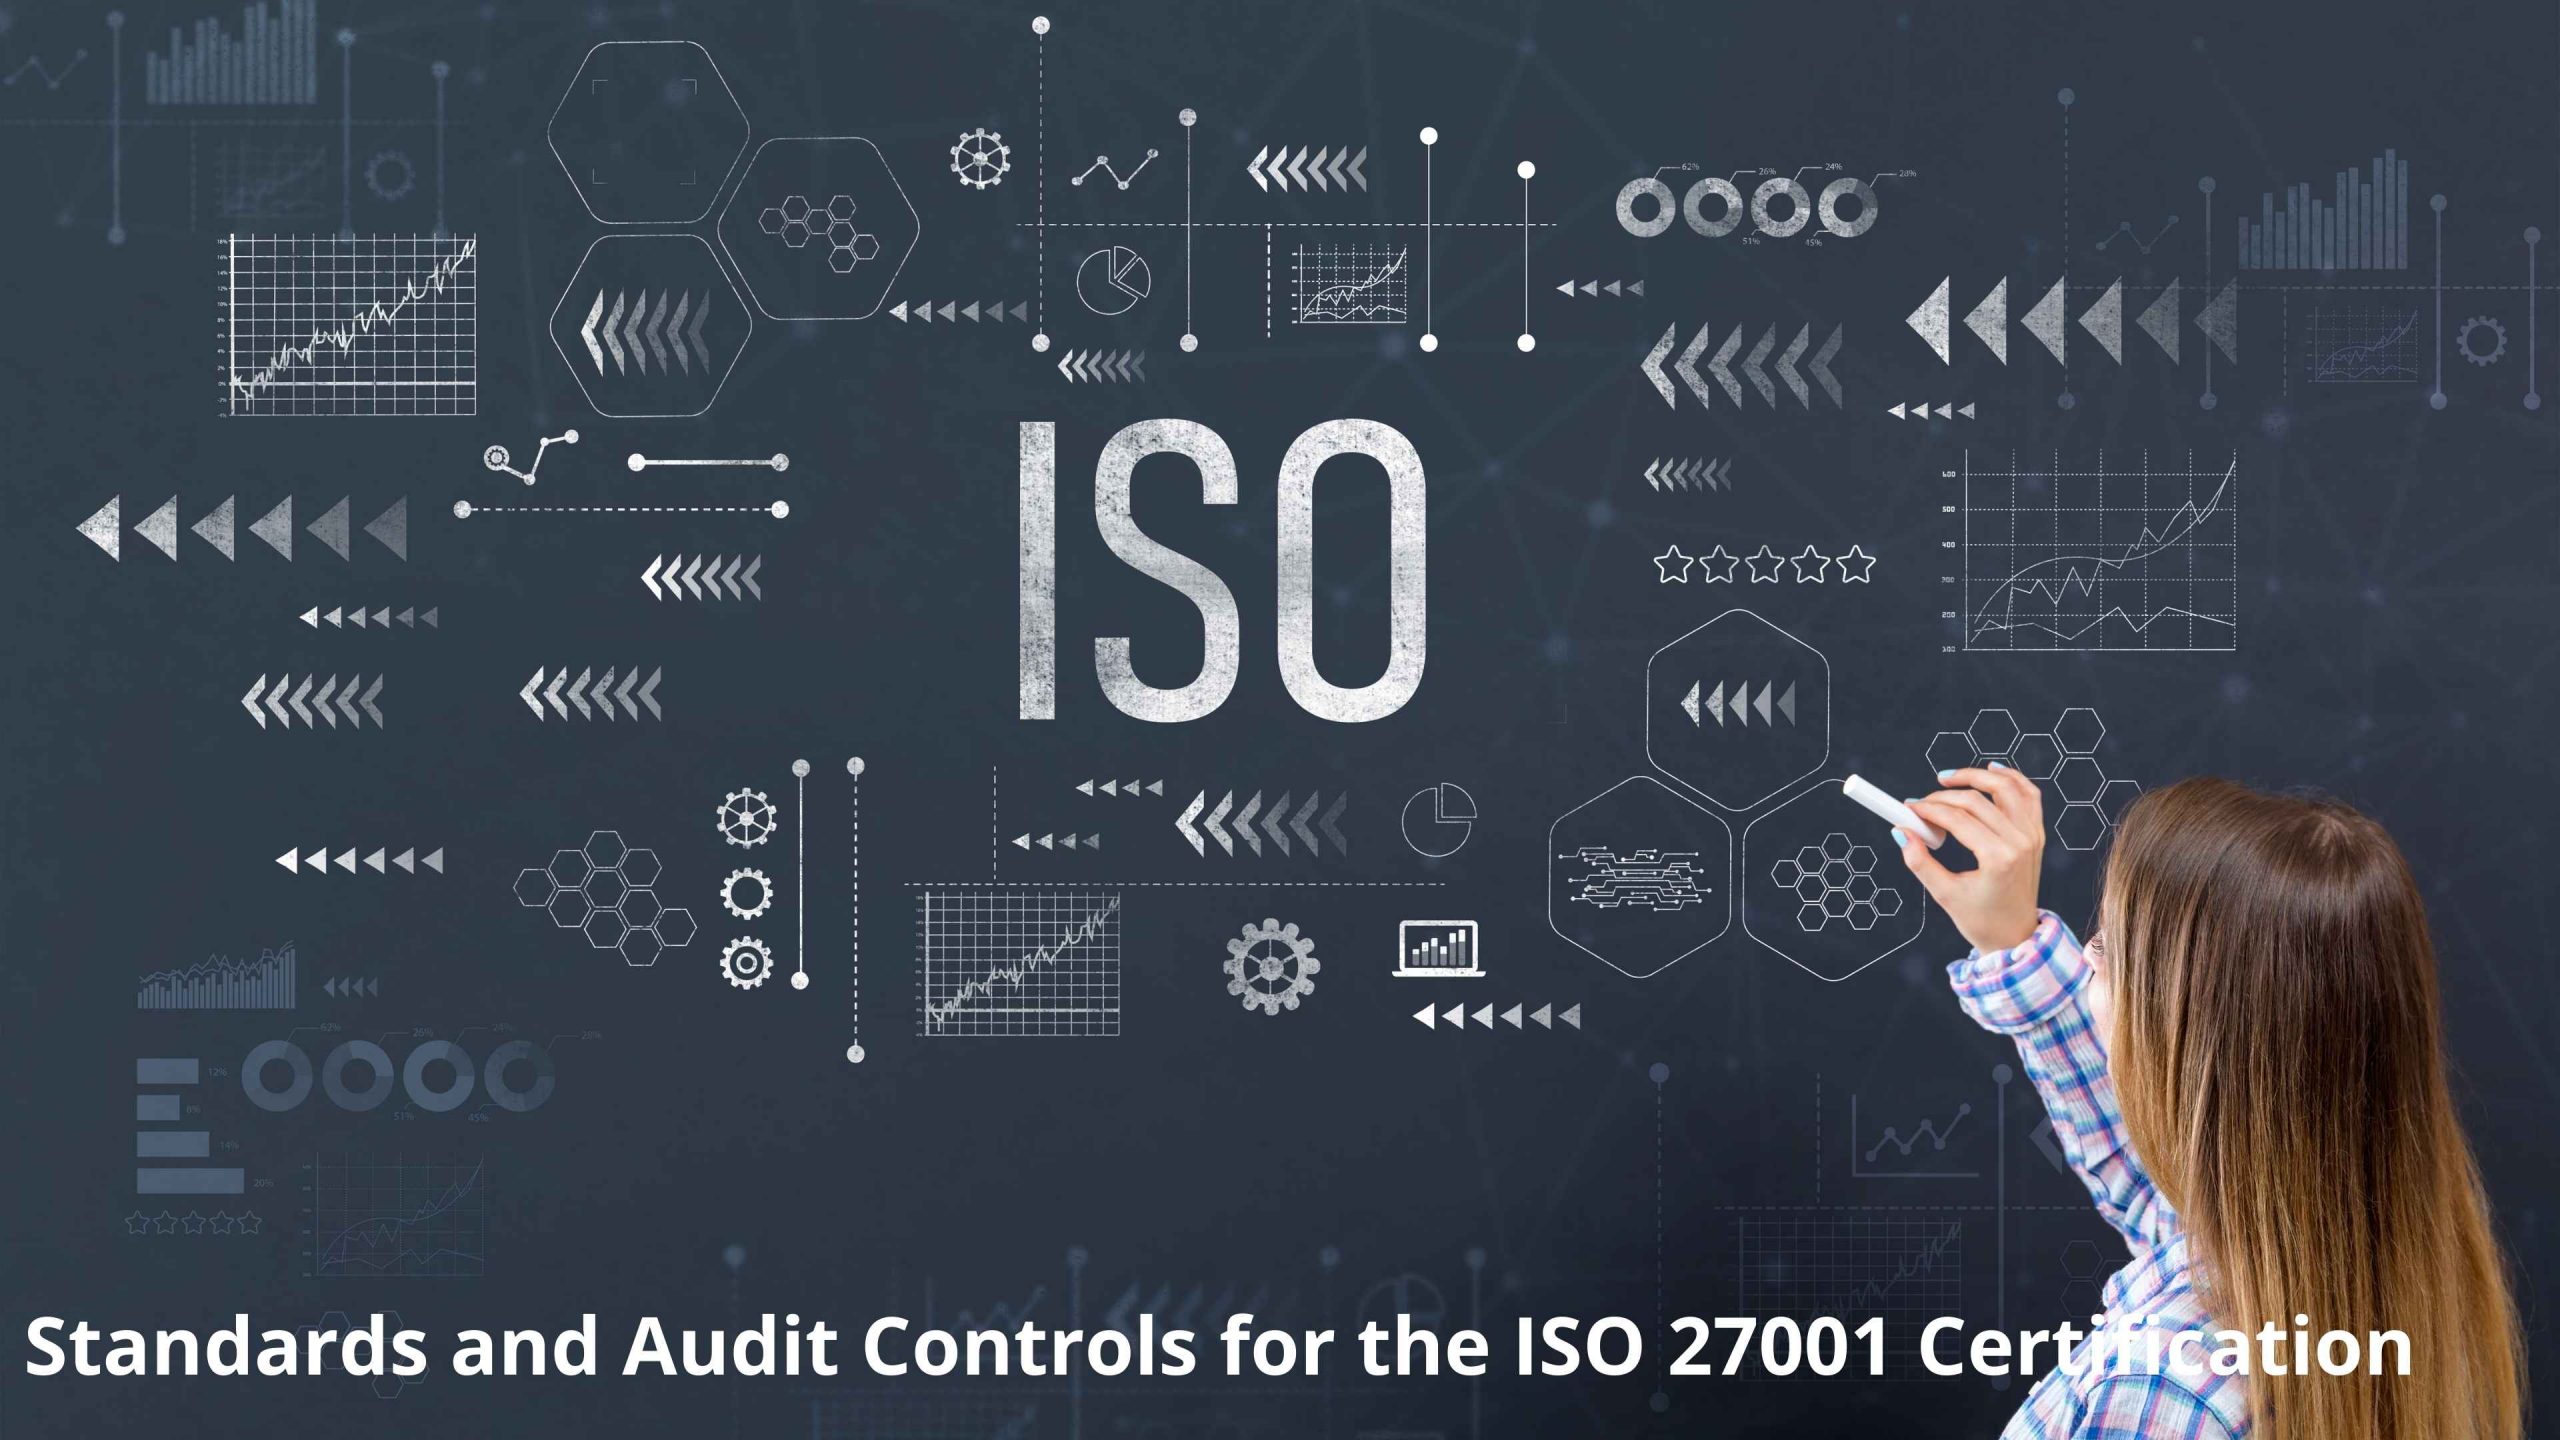 Standards and Audit Controls for the ISO 27001 Certification